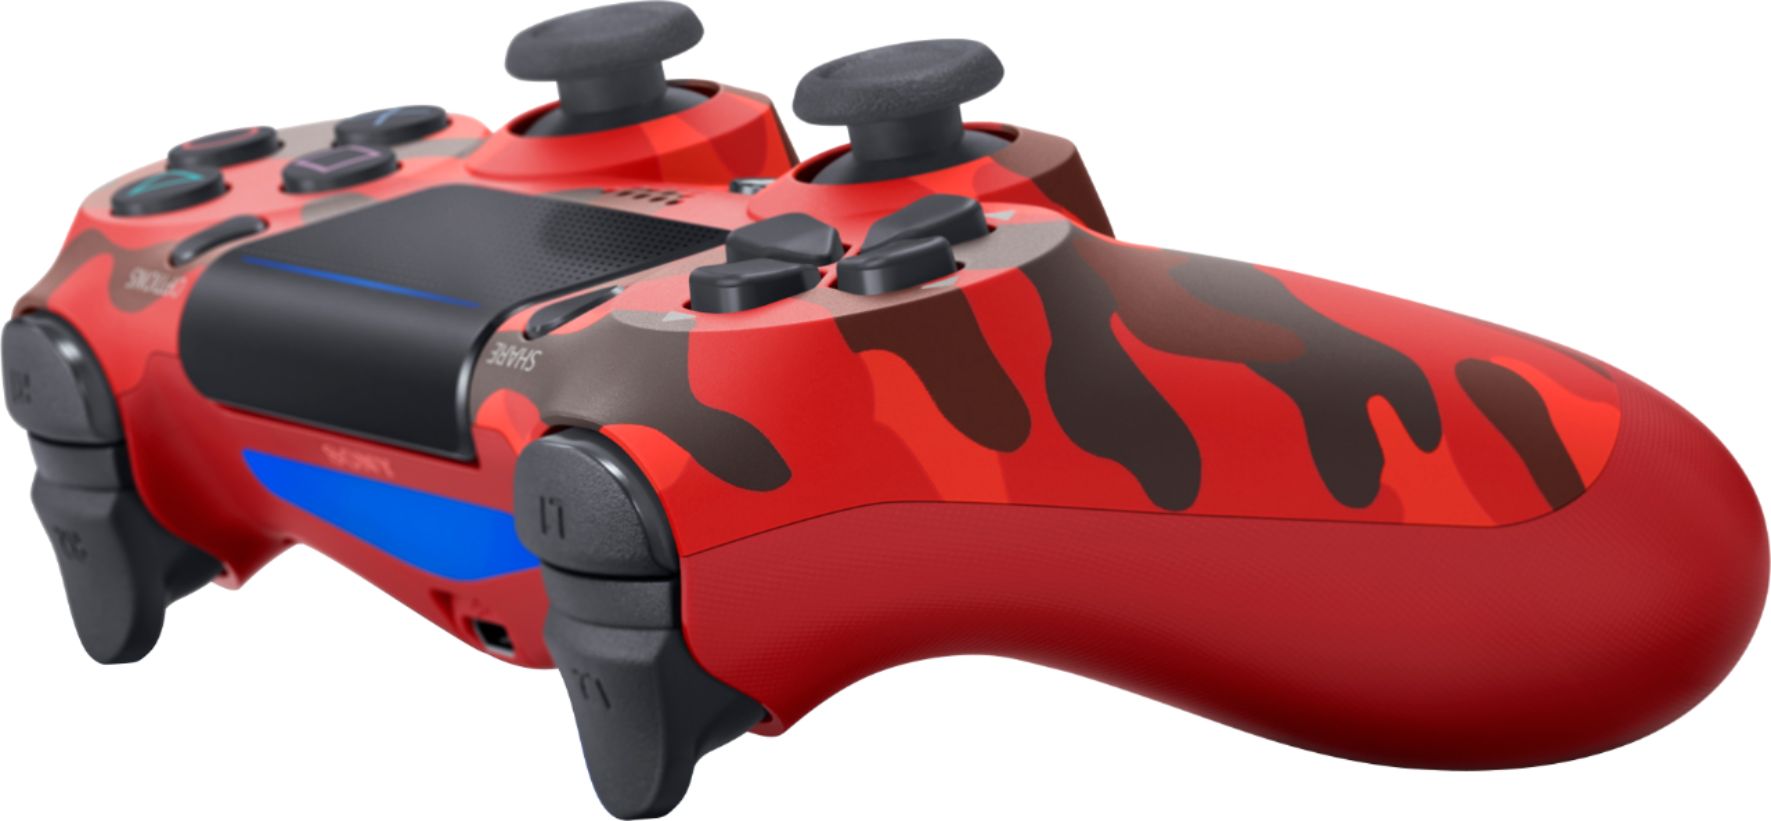 red camo ps4